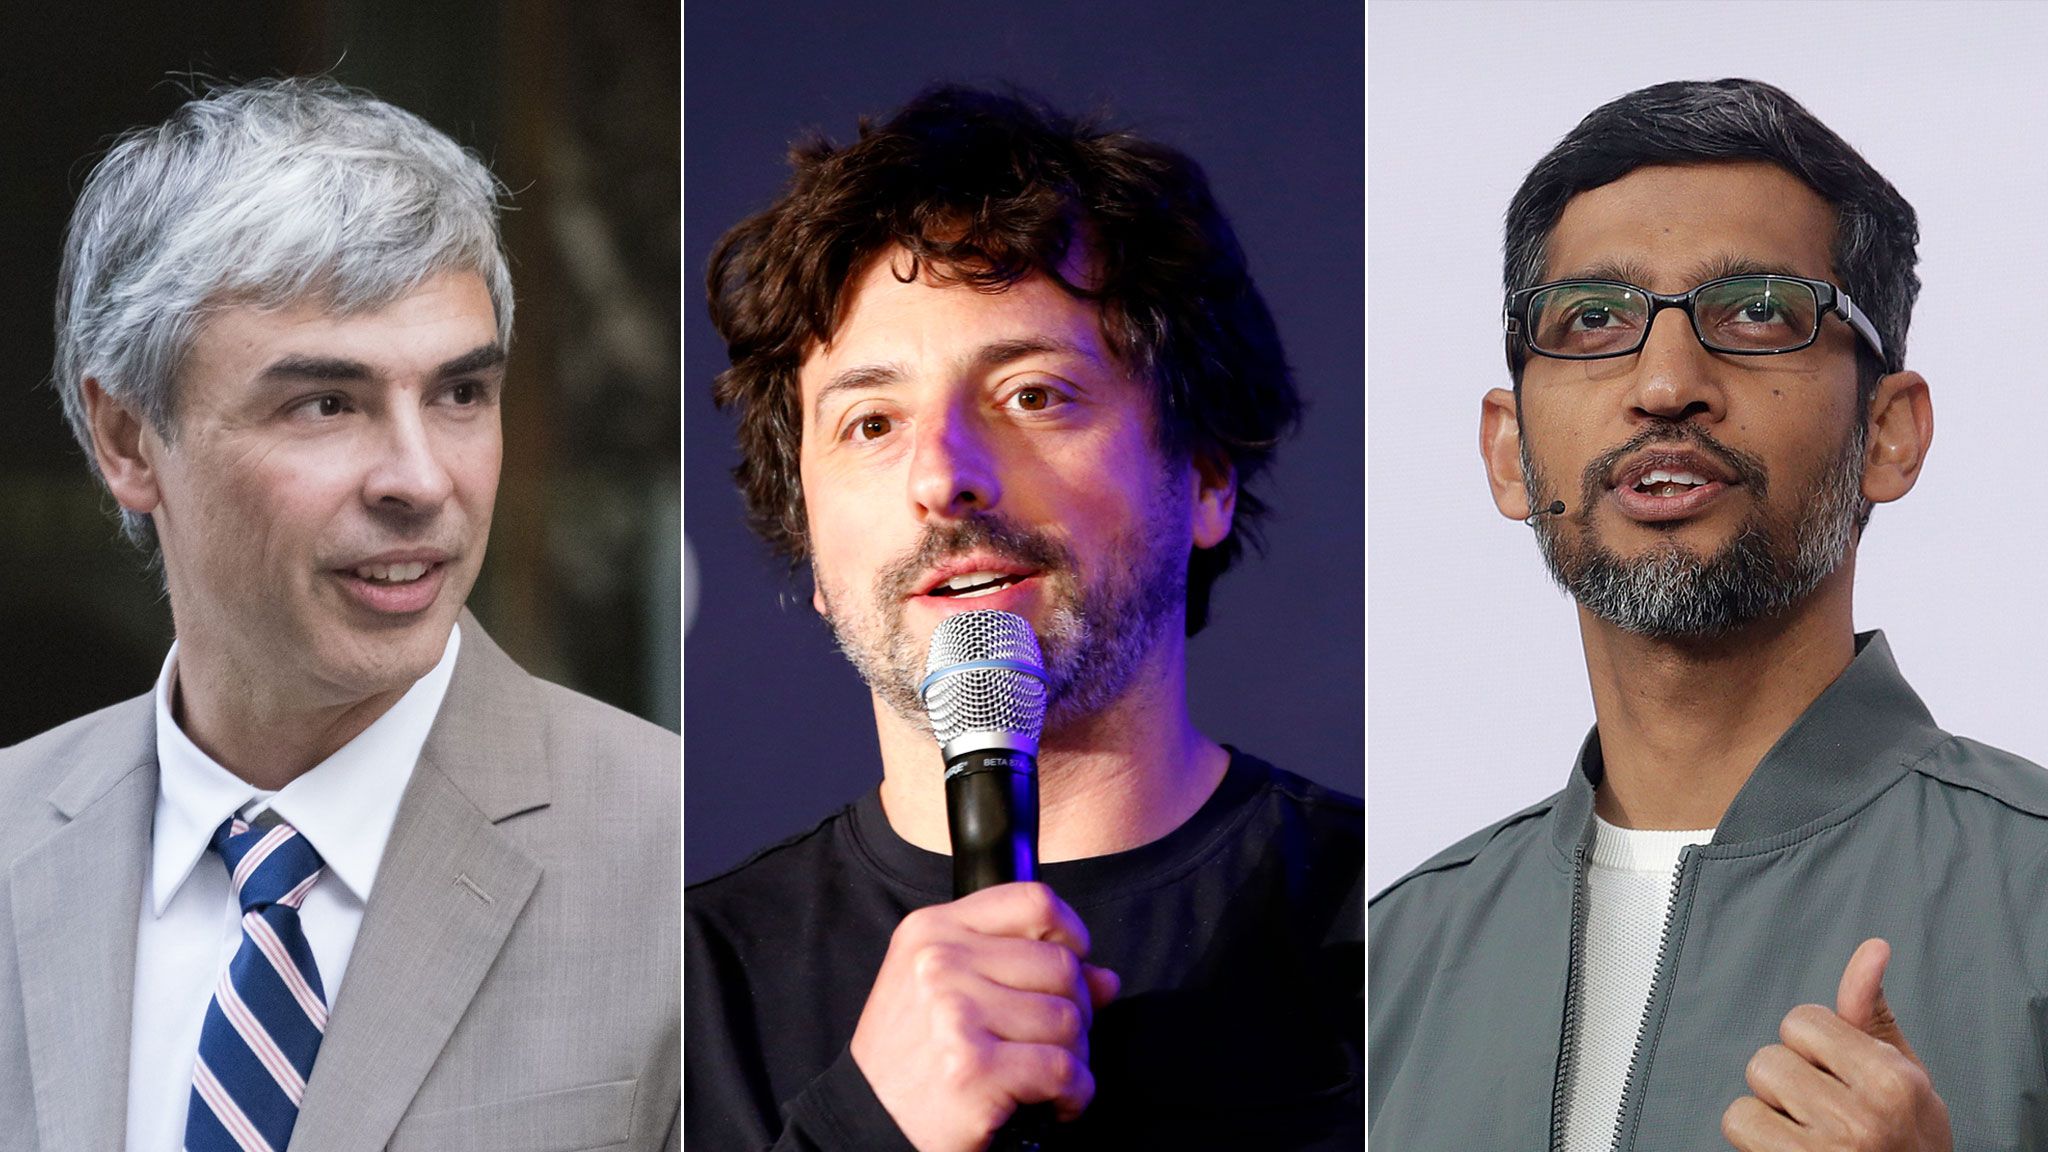 Google founders' exit signals end of era at search giant